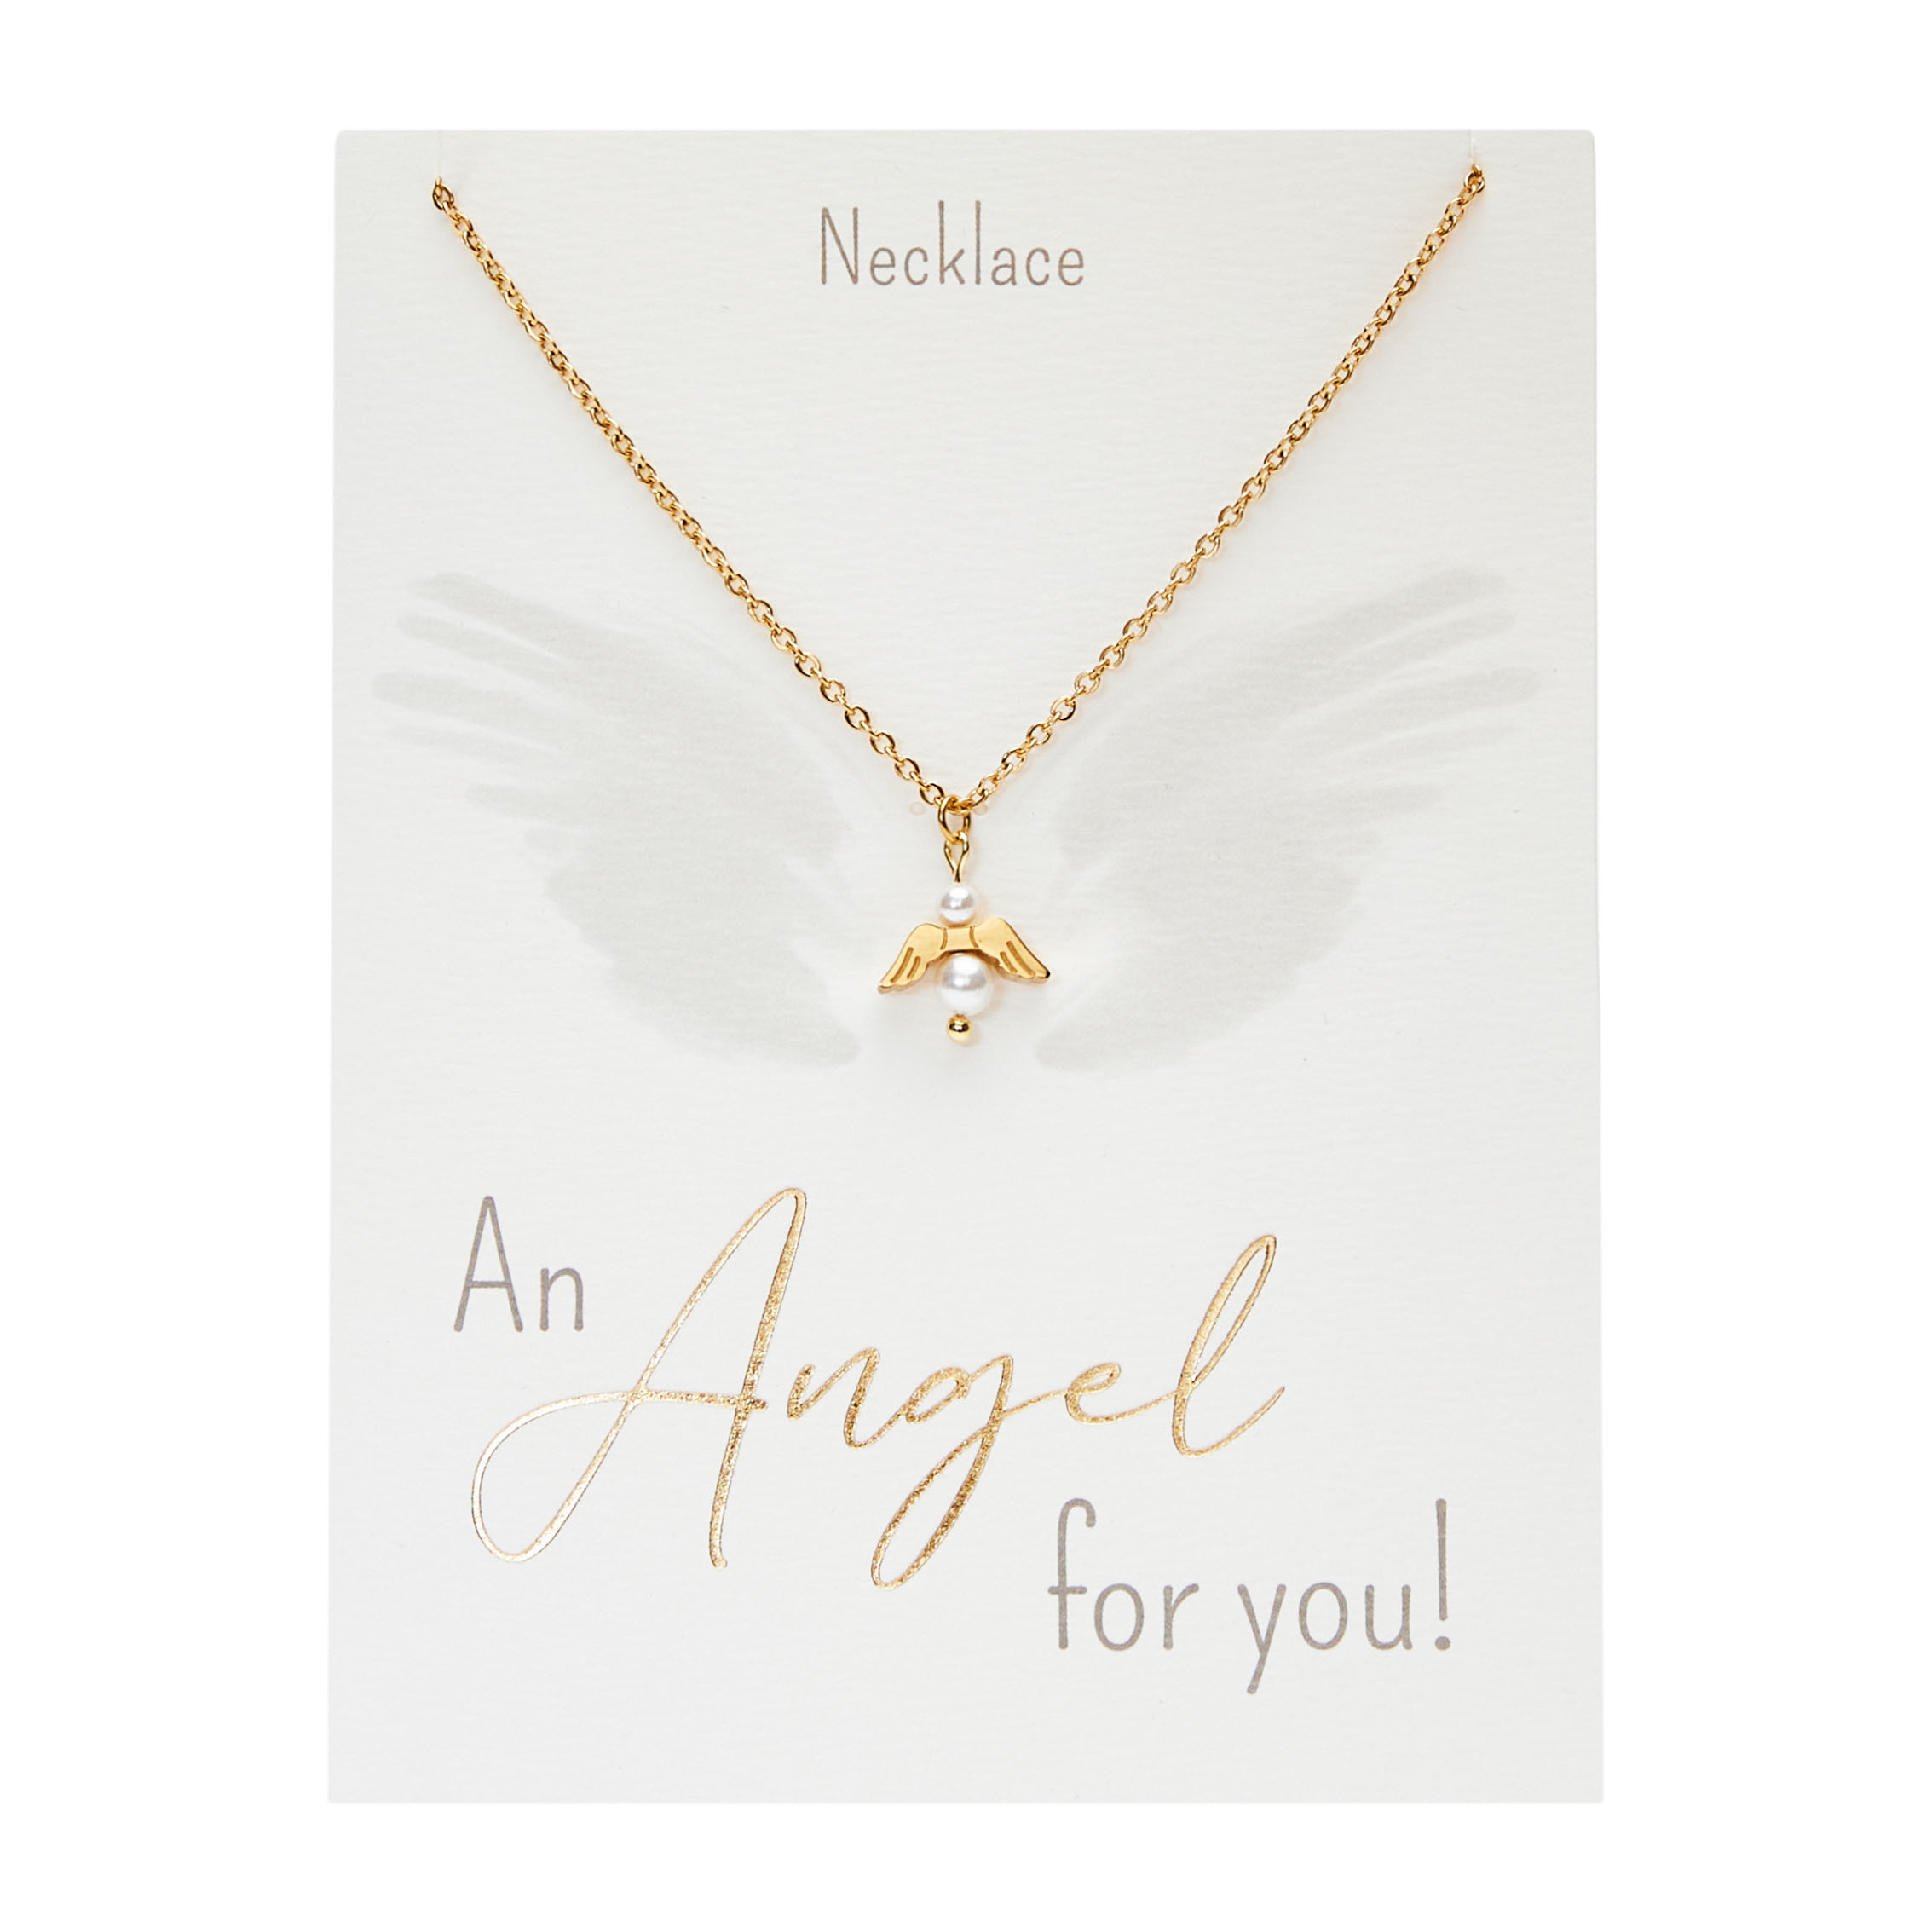 Display necklaces "An Angel for you" 